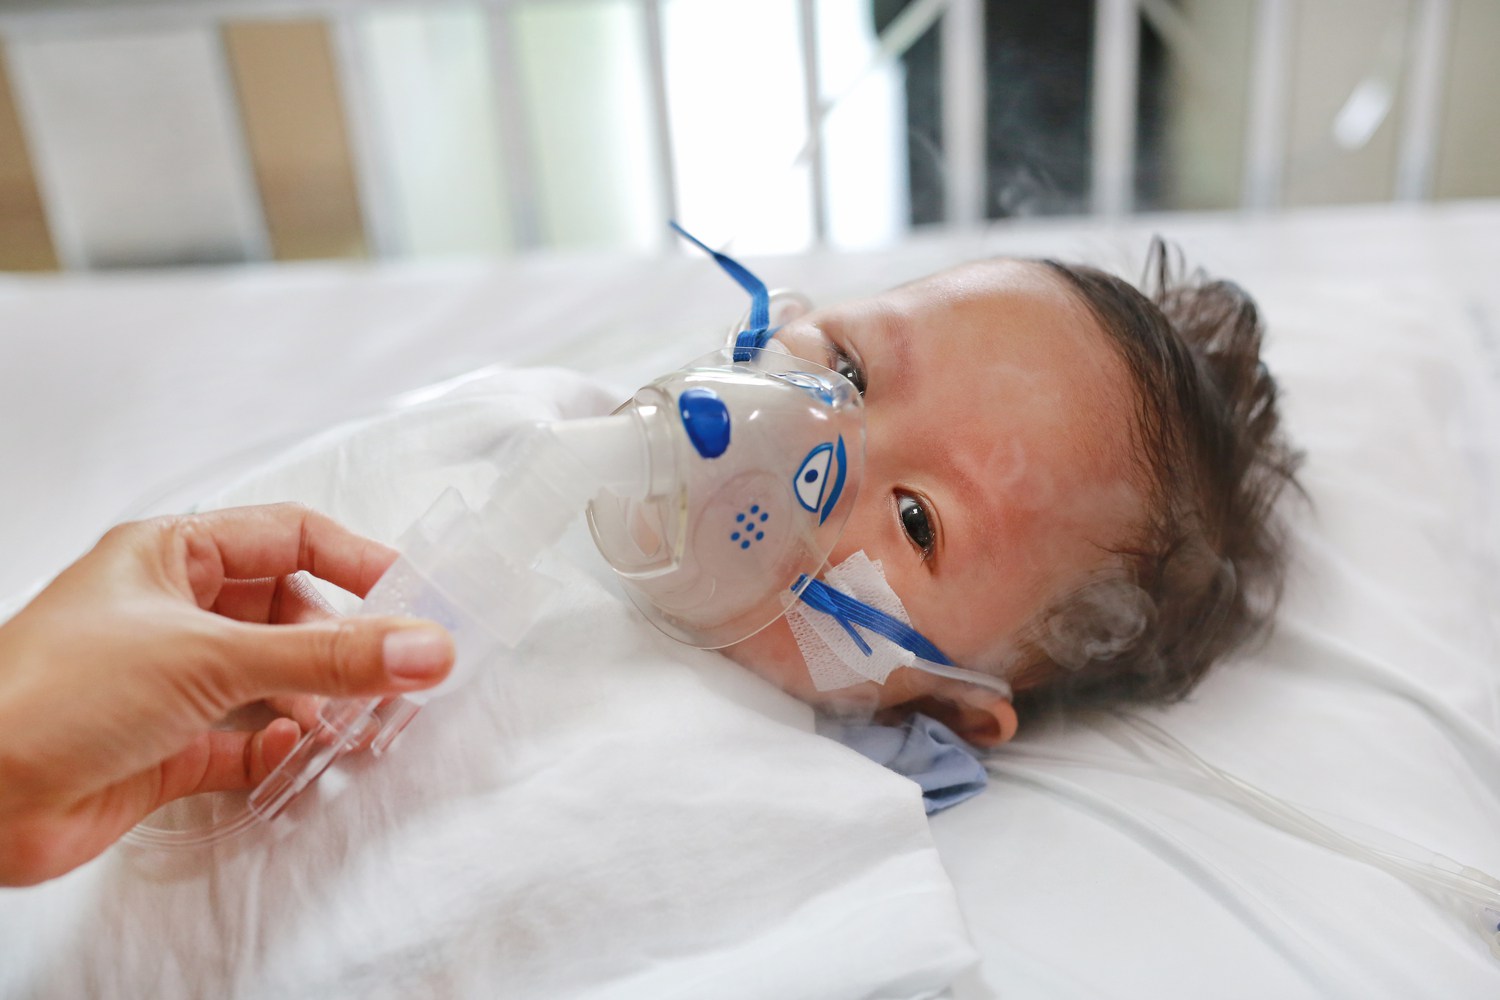 Treatment Options For Breathing Problems in Babies